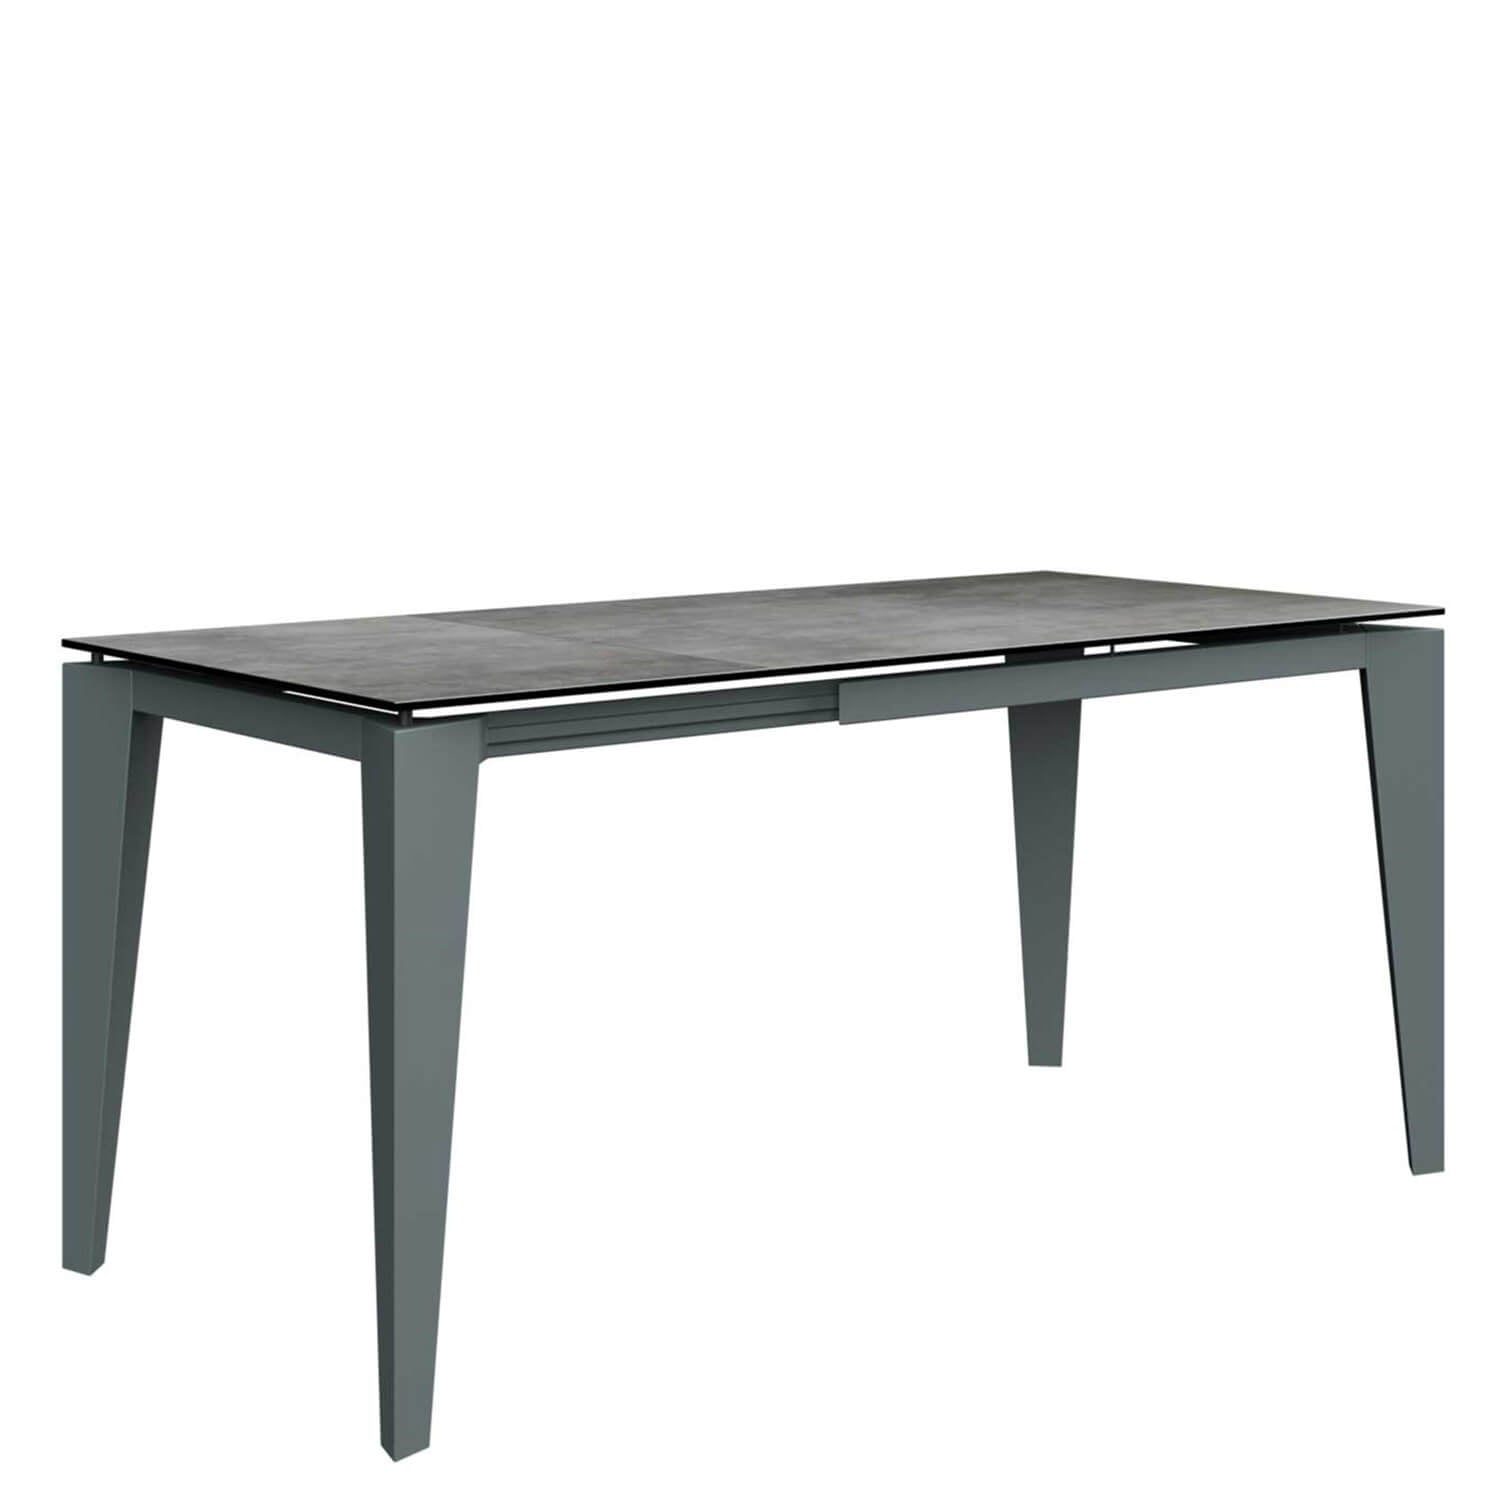 Verano extension dining table